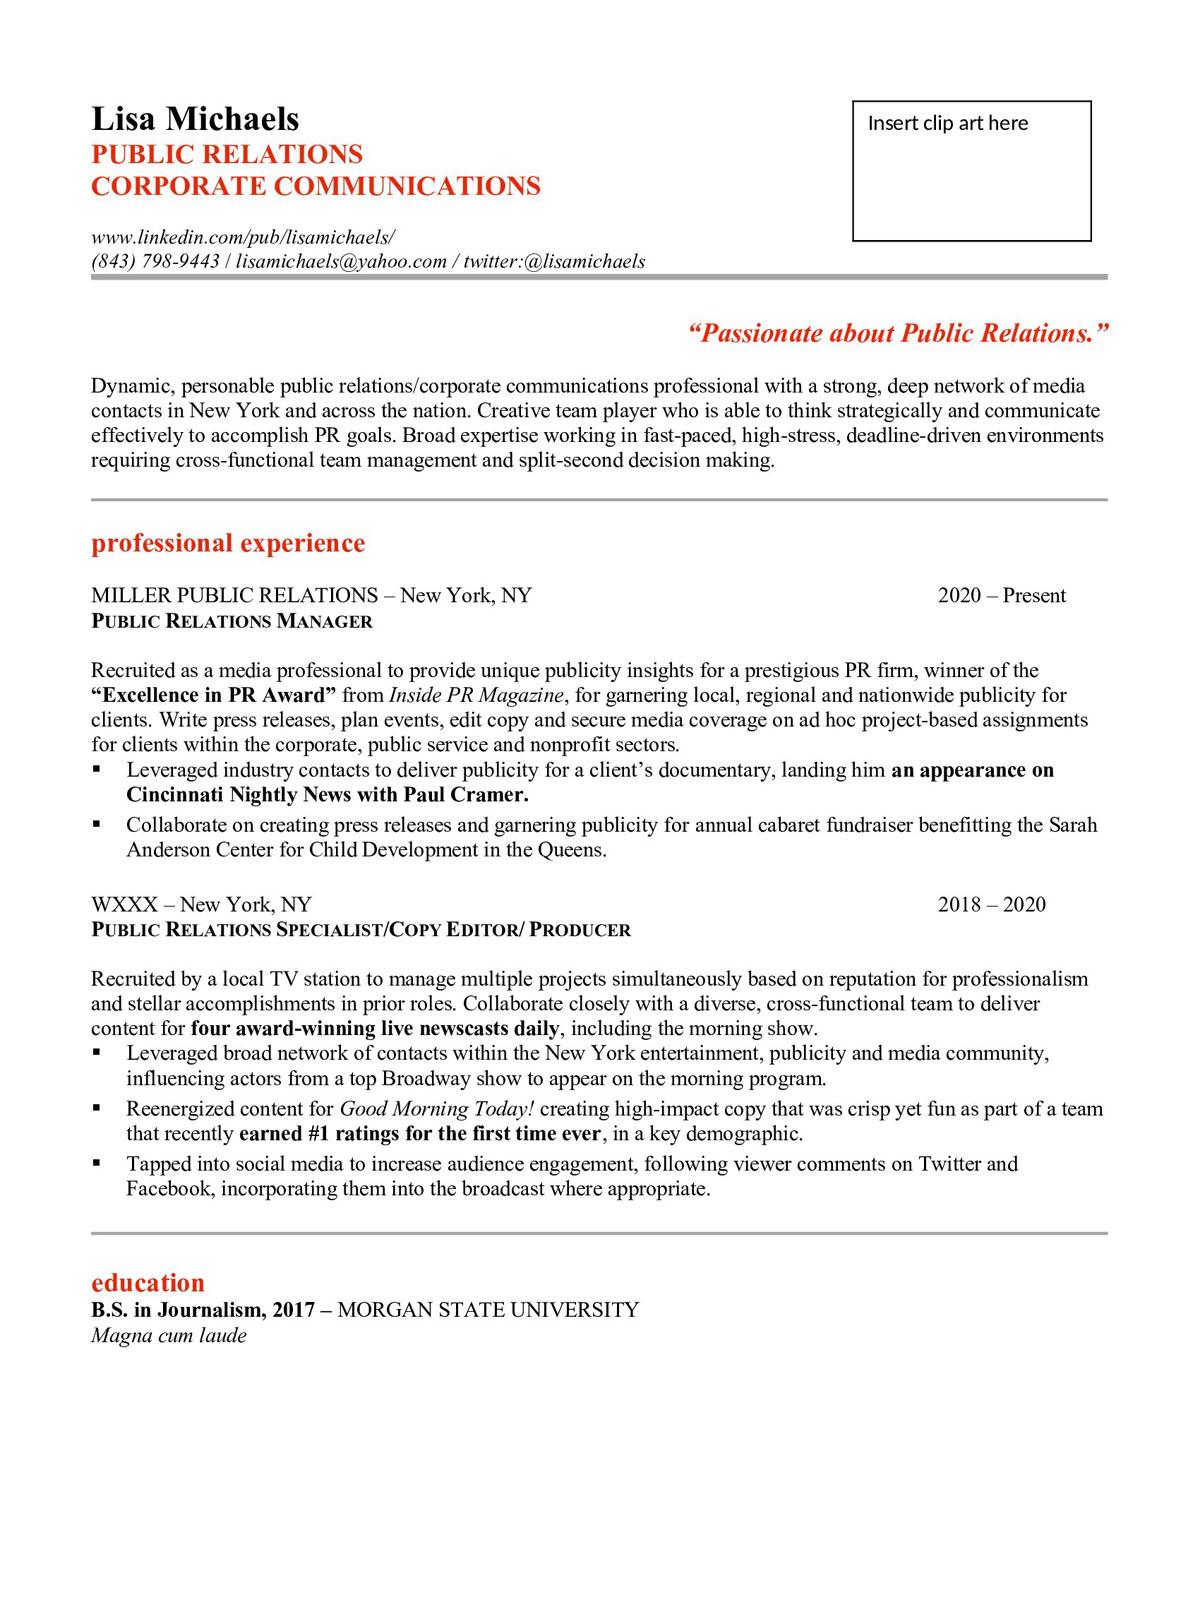 Sample resume: Public Relations, Low Experience, Chronological